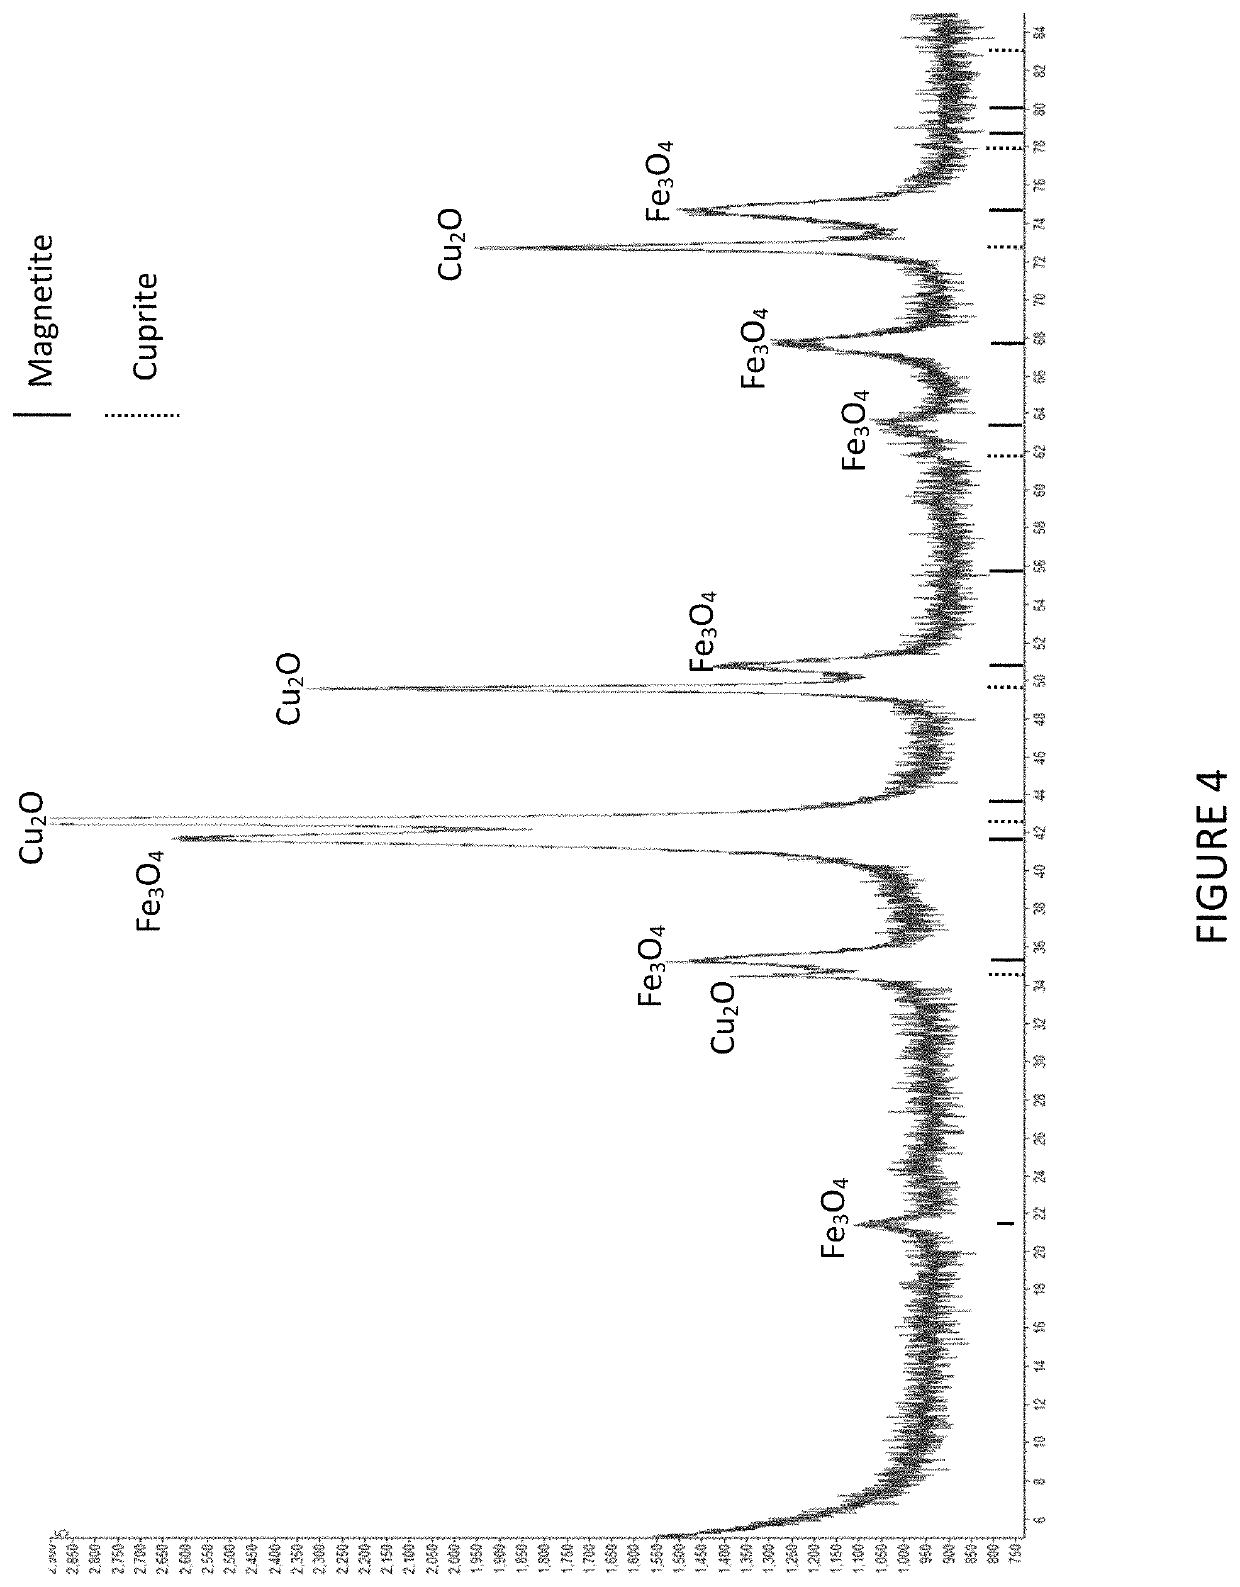 Methods for controlling iron via magnetite formation in hydrometallurgical processes